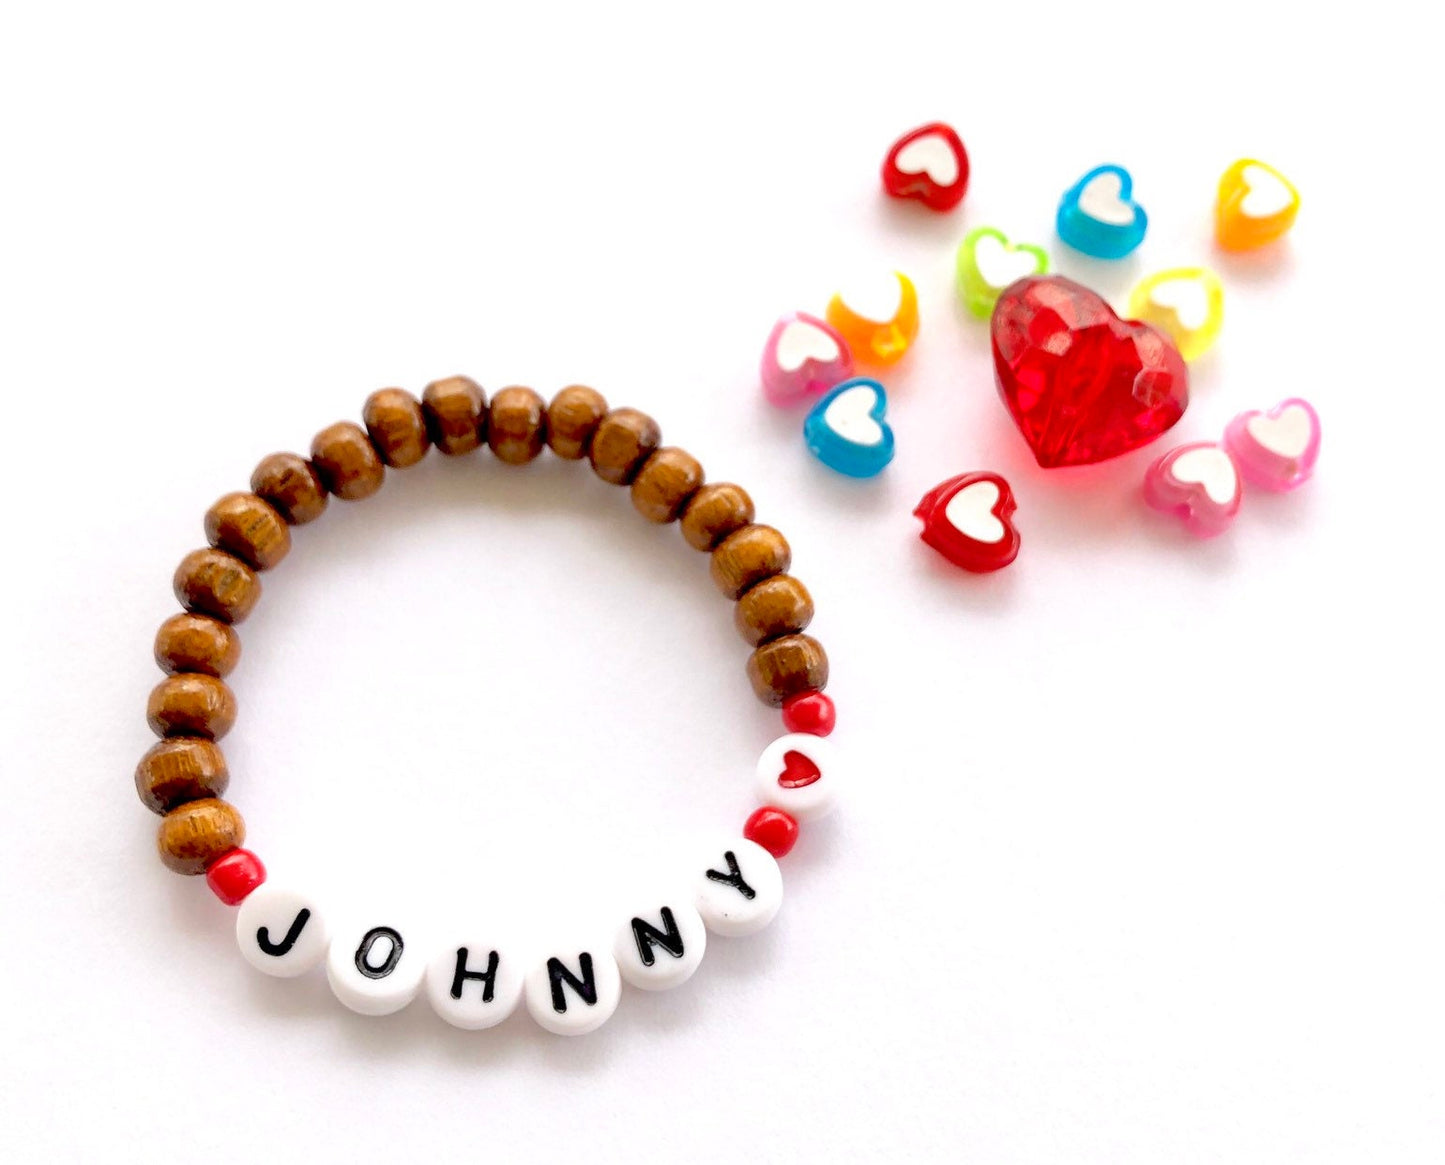 Valentines day gift for boys / Toddler valentines day gift, boys bracelet, heart bracelet, valentines gift for toddler, bracelet for toddler